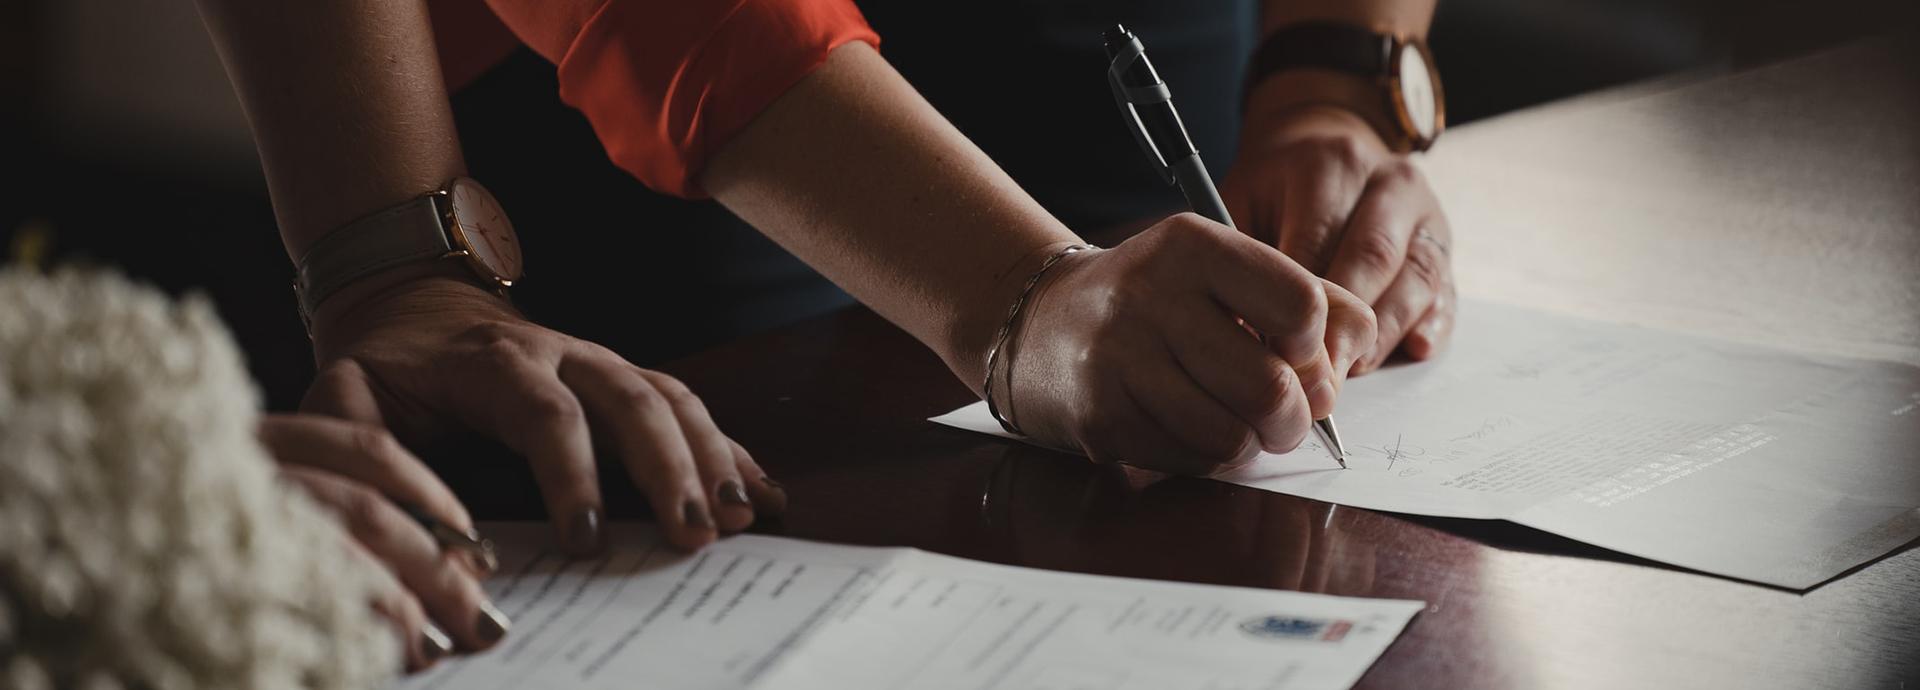 There are documents on a table and someone signing one of them with a pen. There is another person next to the one who signs the paper, their hands on the table.